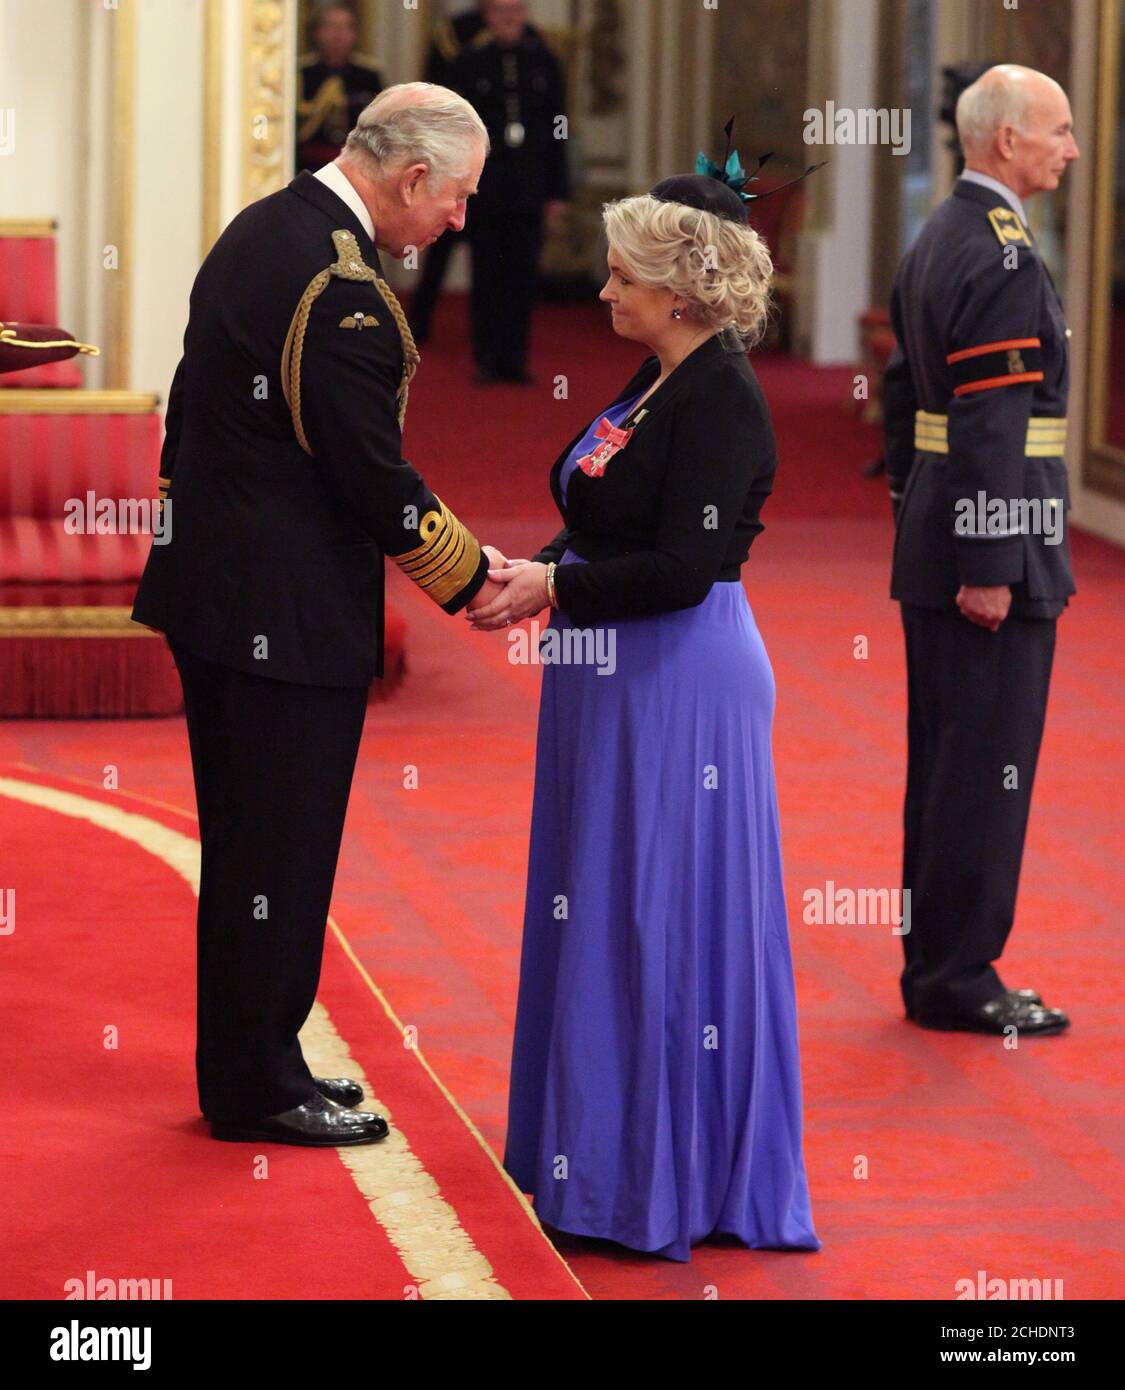 Kate Hardcastle from West Bretton is made an MBE (Member of the Order of the British Empire) by the Prince of Wales at Buckingham Palace. Stock Photo